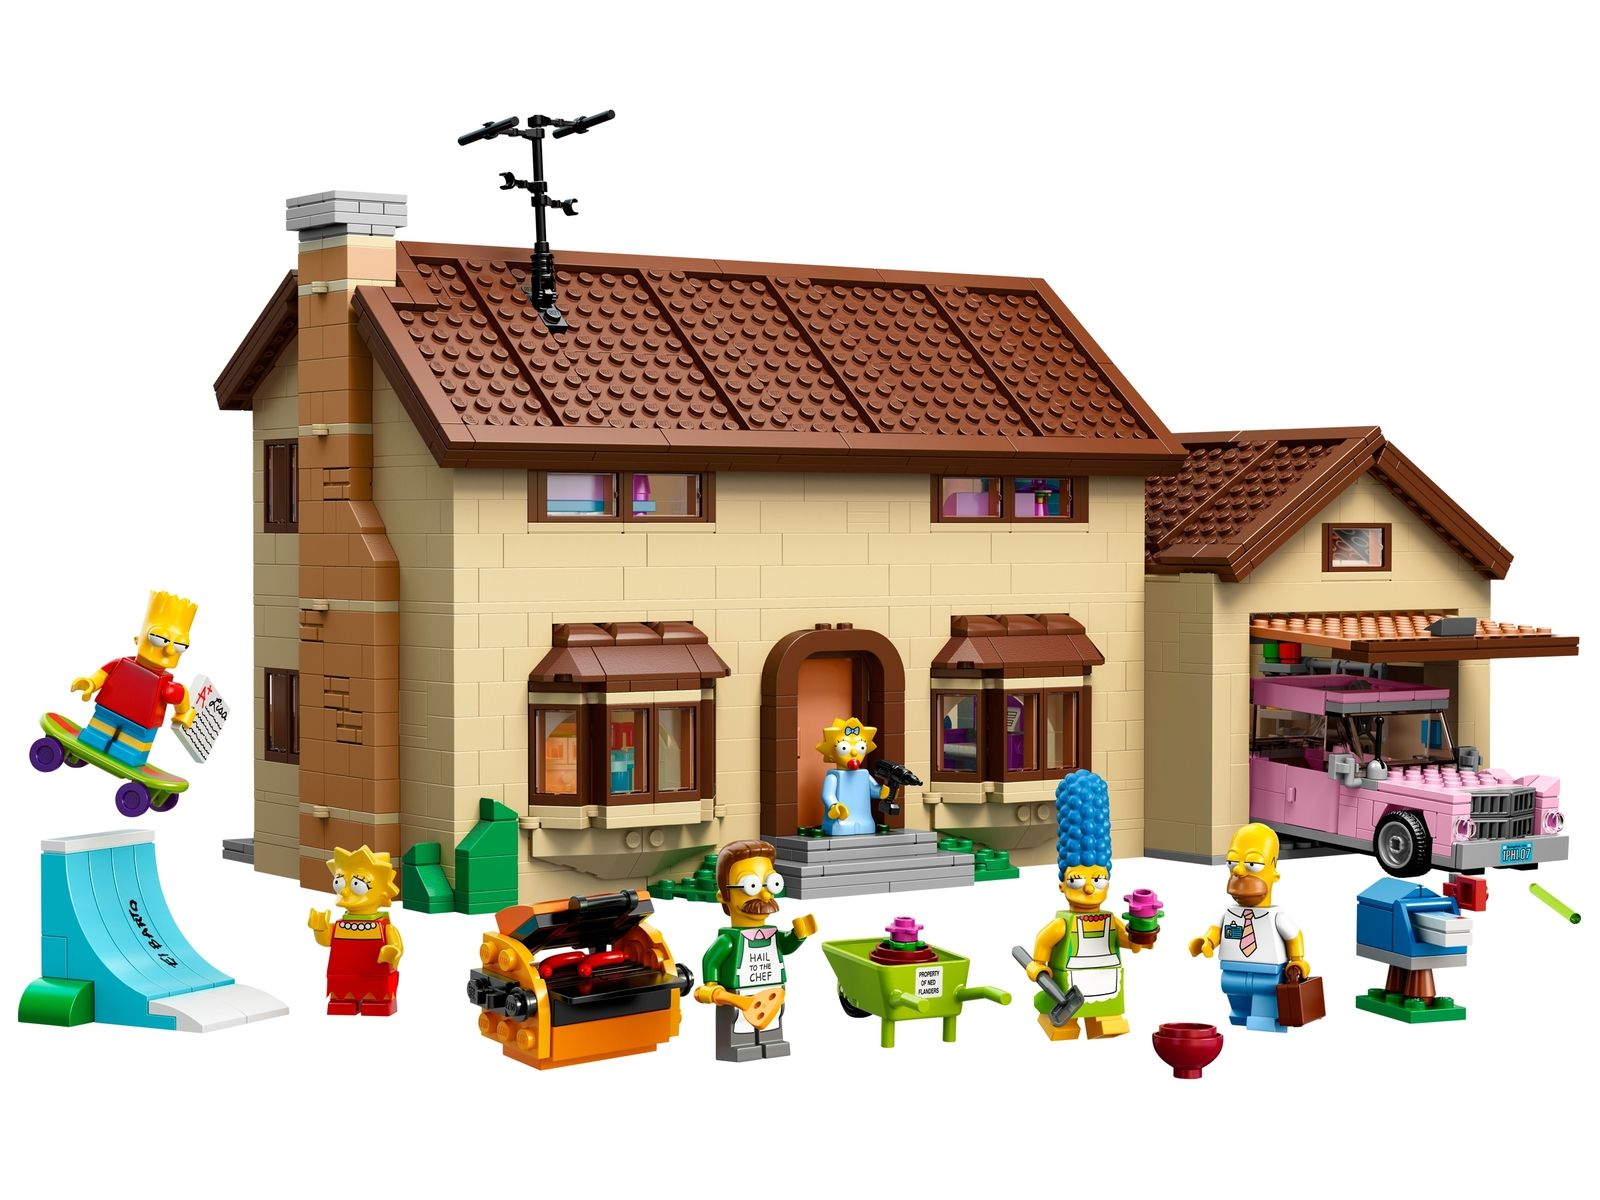 LEGO 71006 The Simpsons House